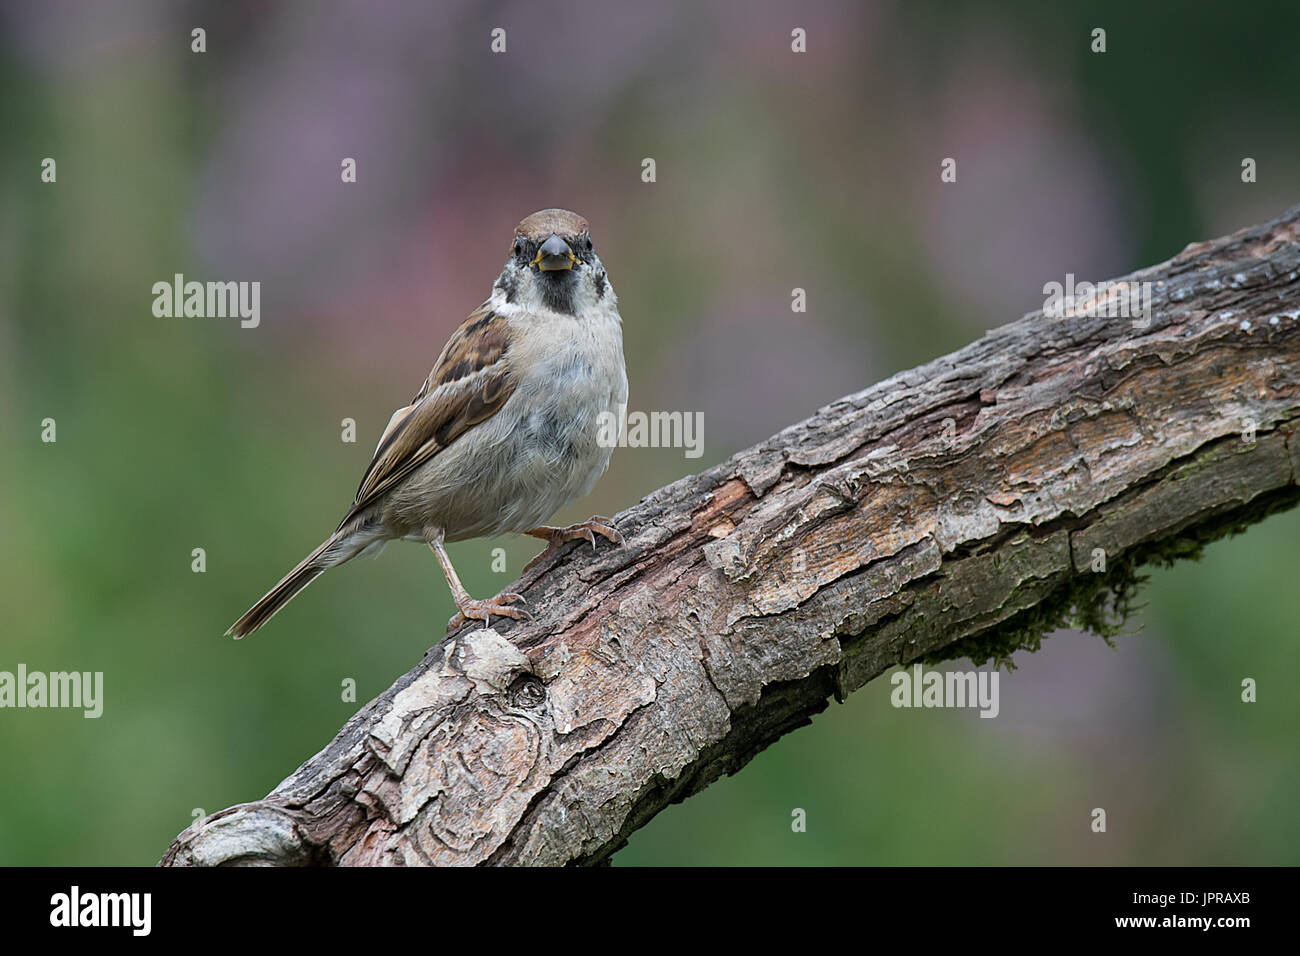 Portrait of a tree sparrow perched on a branch looking directly forward at the camera Stock Photo